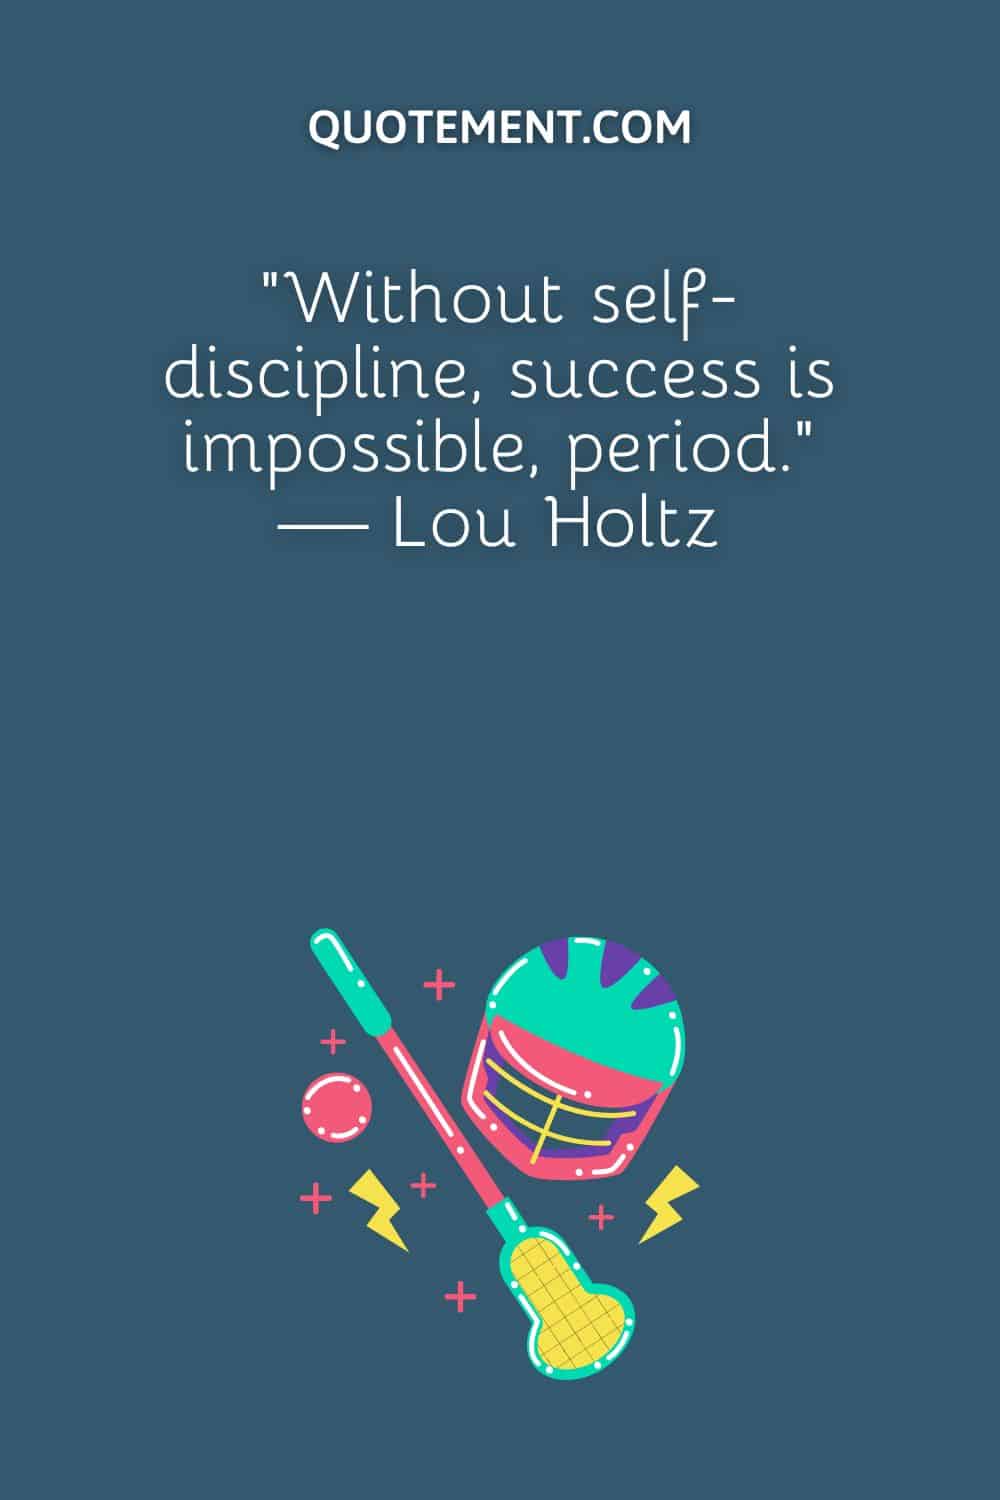 “Without self-discipline, success is impossible, period.” — Lou Holtz